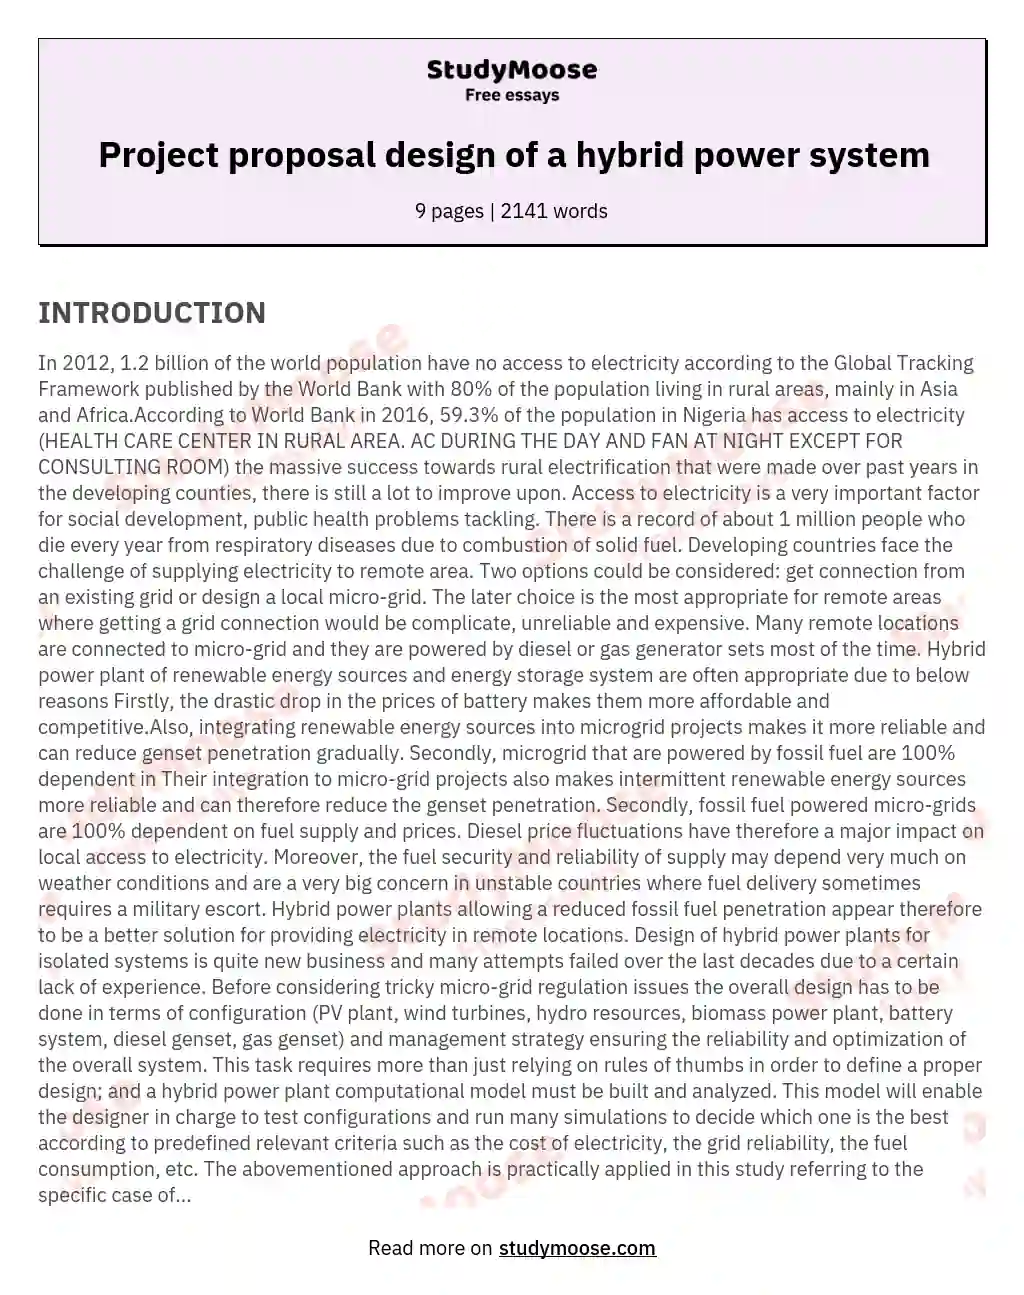 Project proposal design of a hybrid power system essay